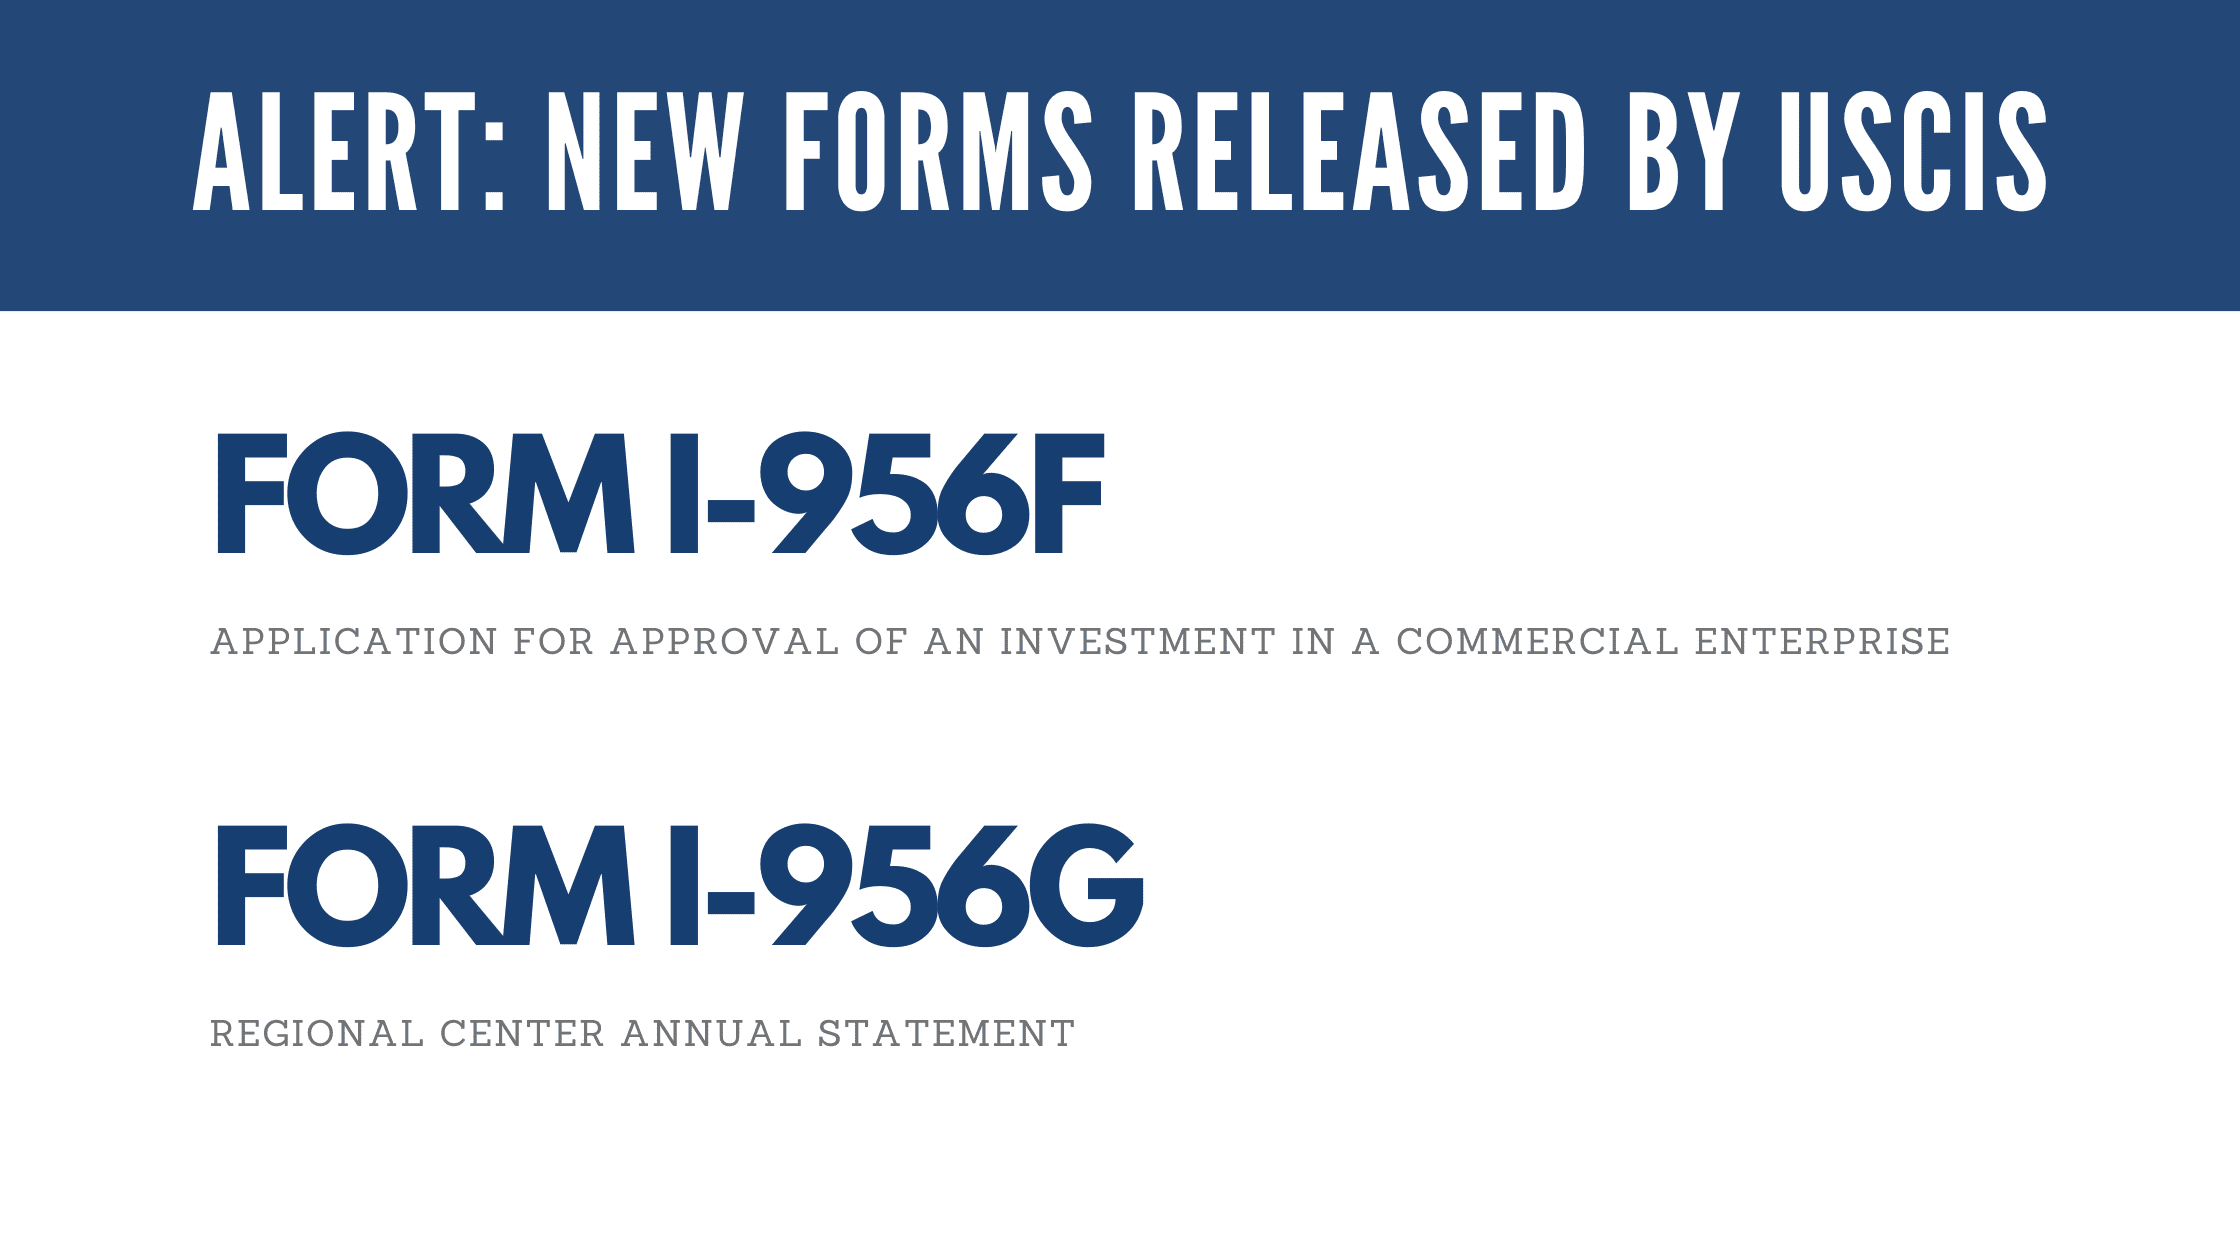 Alert: USCIS Publishes New Form I-956F and Form I-956G As Additional Supplements to Form I-956